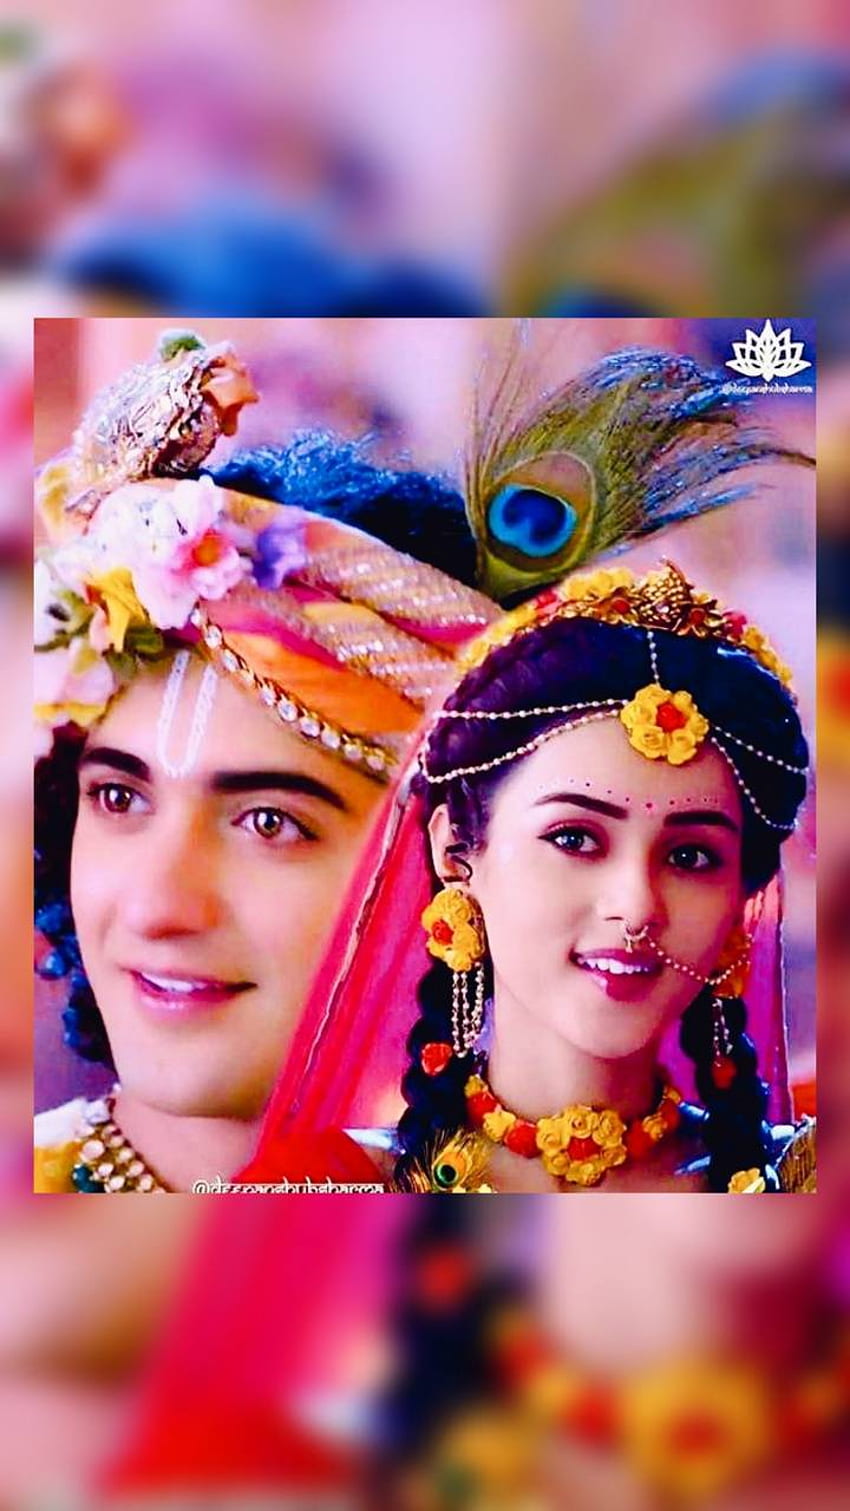 The Ultimate Compilation of Radha Krishna Serial Images in Full 4K Resolution – Over 999 Stunning Pictures